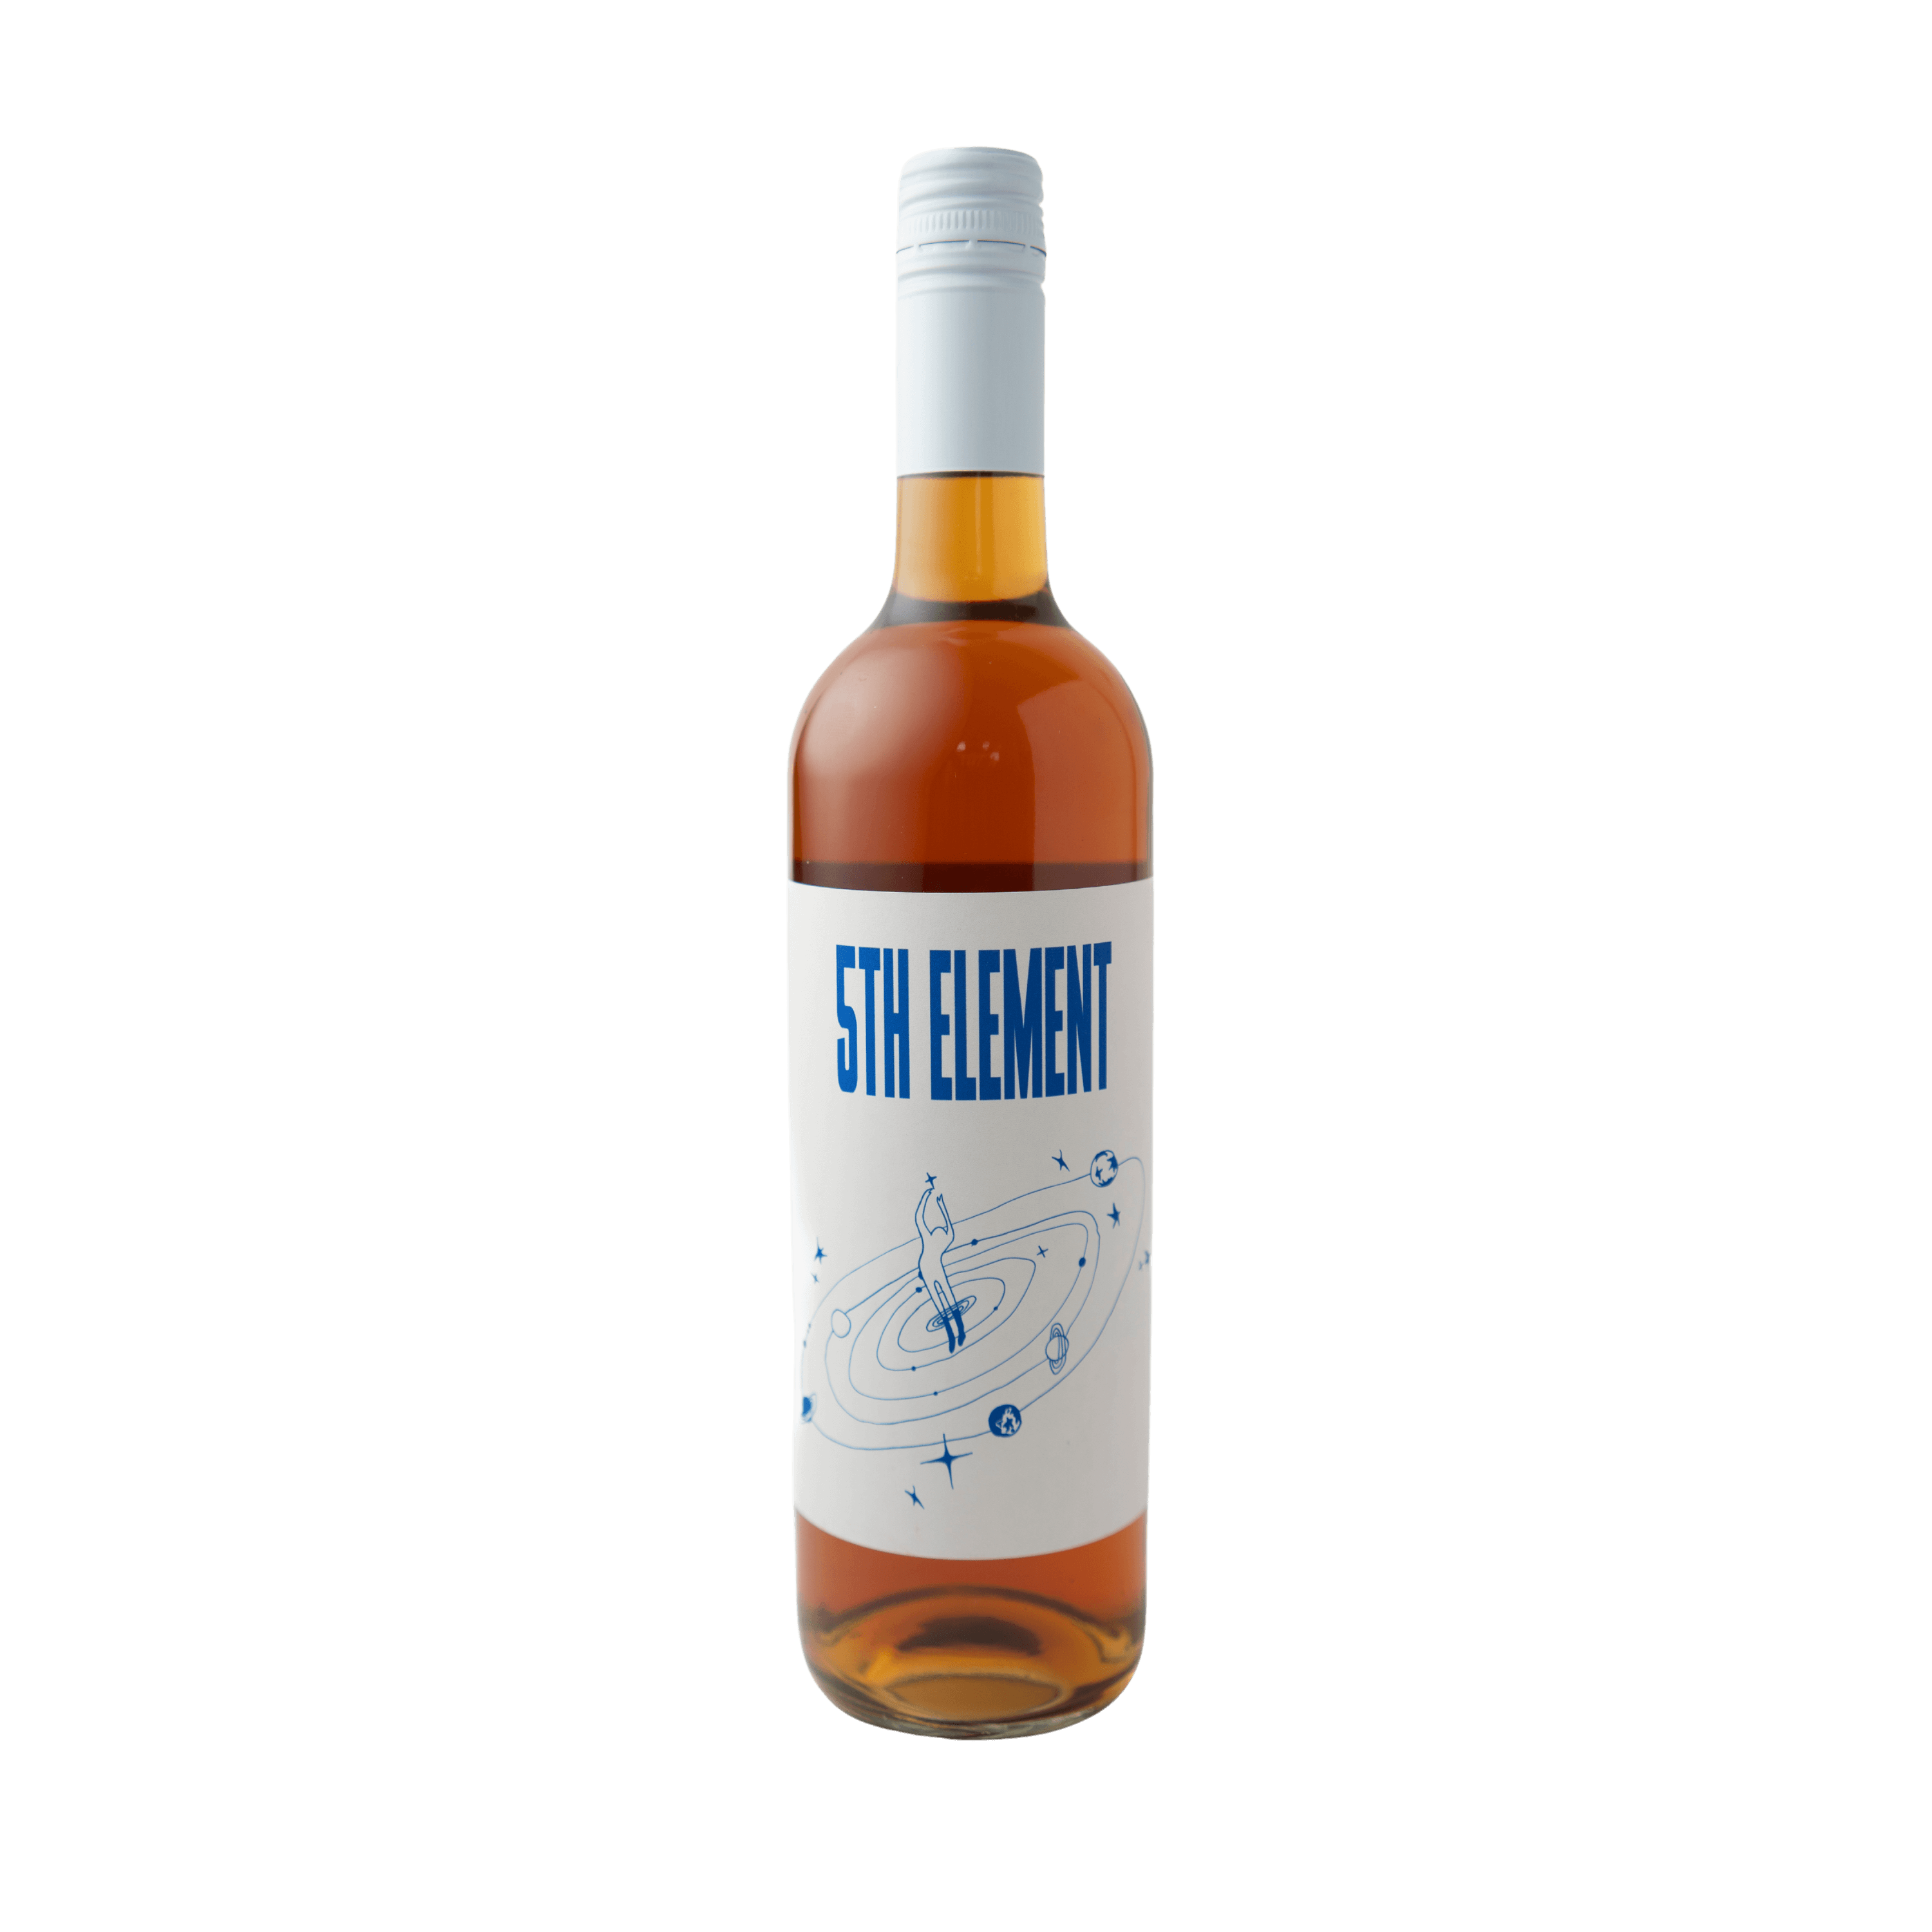 Images of new FORTIFIED WINE 5TH ELEMENT from Traynor Family Vineyard a winery in Prince Edward County, Ontario 100 ACRES WOOD